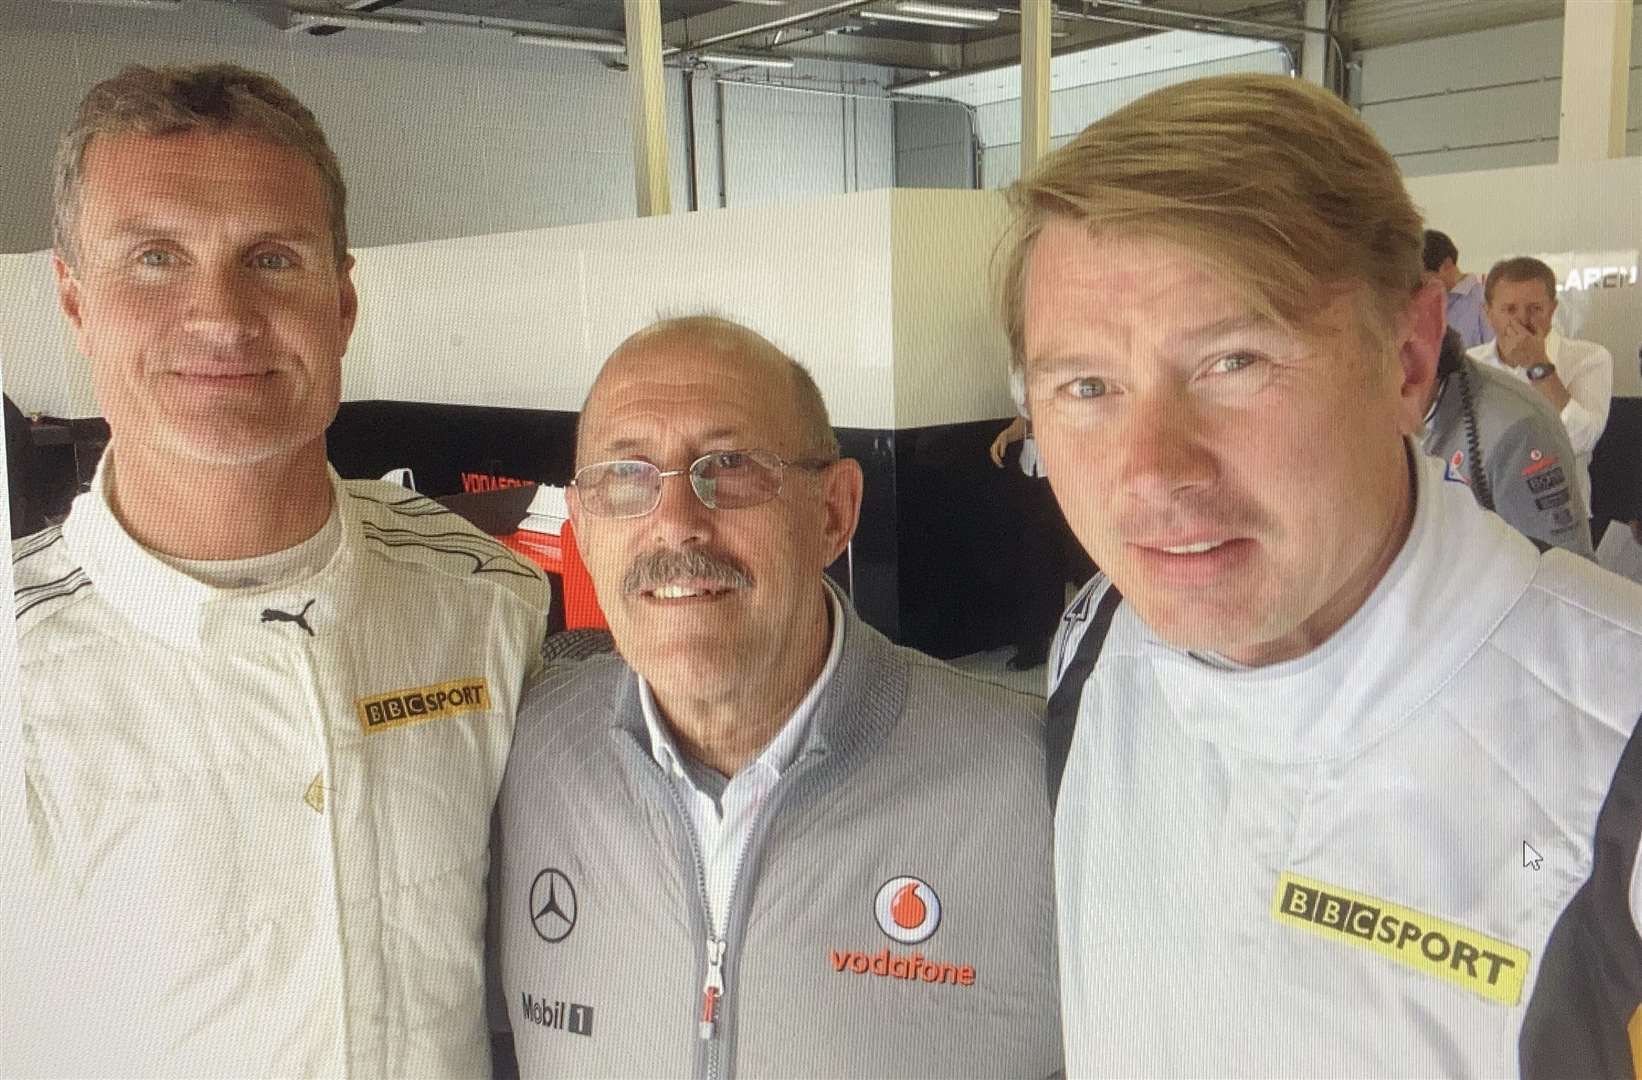 Ron with Mika Hakkinen and David Coulthard